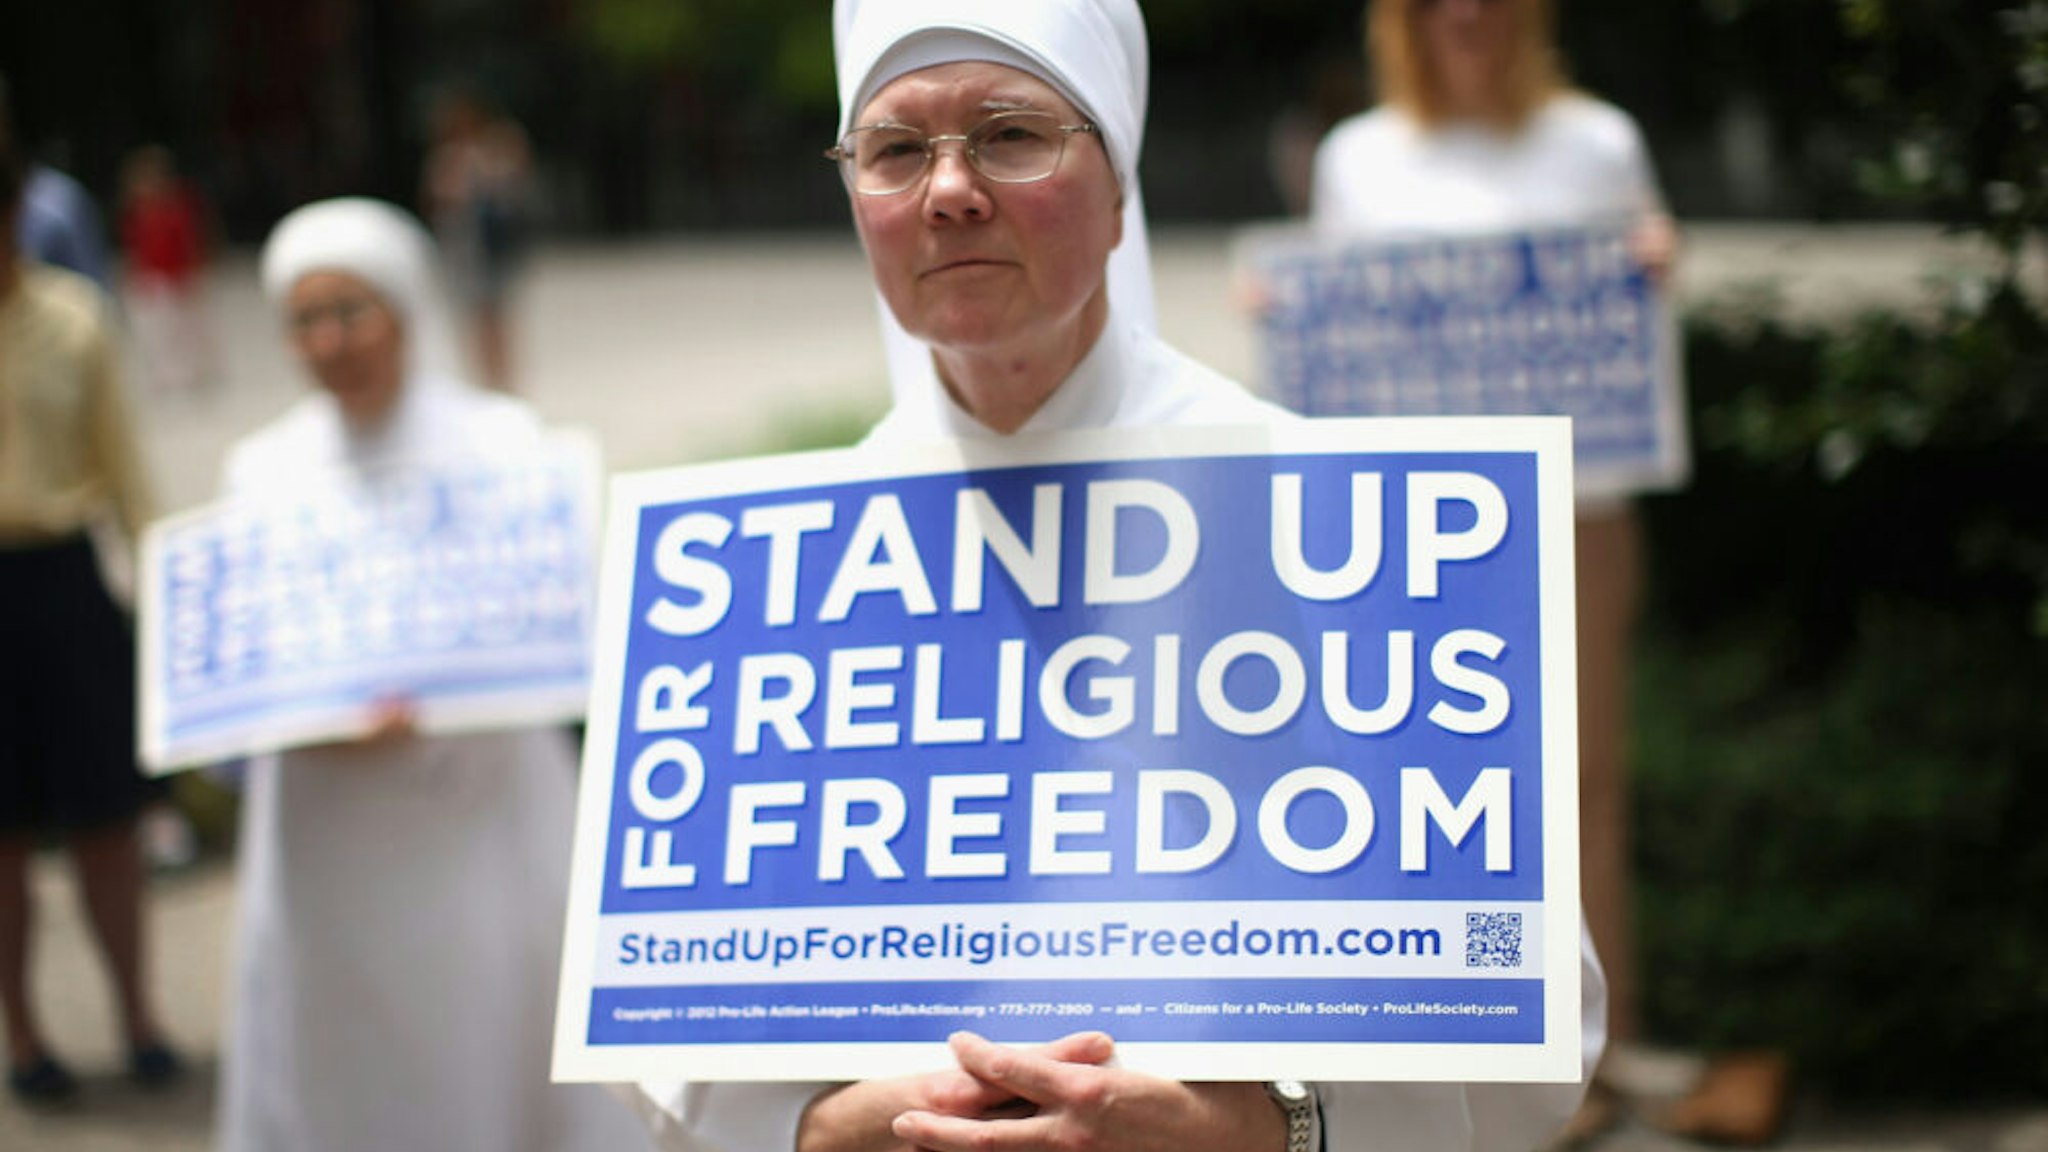 CHICAGO, IL - JUNE 30: Sister Caroline attends a rally with other supporters of religious freedom to praise the Supreme Court's decision in the Hobby Lobby, contraception coverage requirement case on June 30, 2014 in Chicago, Illinois. Oklahoma-based Hobby Lobby, which operates a chain of arts-and-craft stores, challenged the provision and the high court ruled 5-4 that requiring family-owned corporations to pay for insurance coverage for contraception under the Affordable Care Act violated a federal law protecting religious freedom.